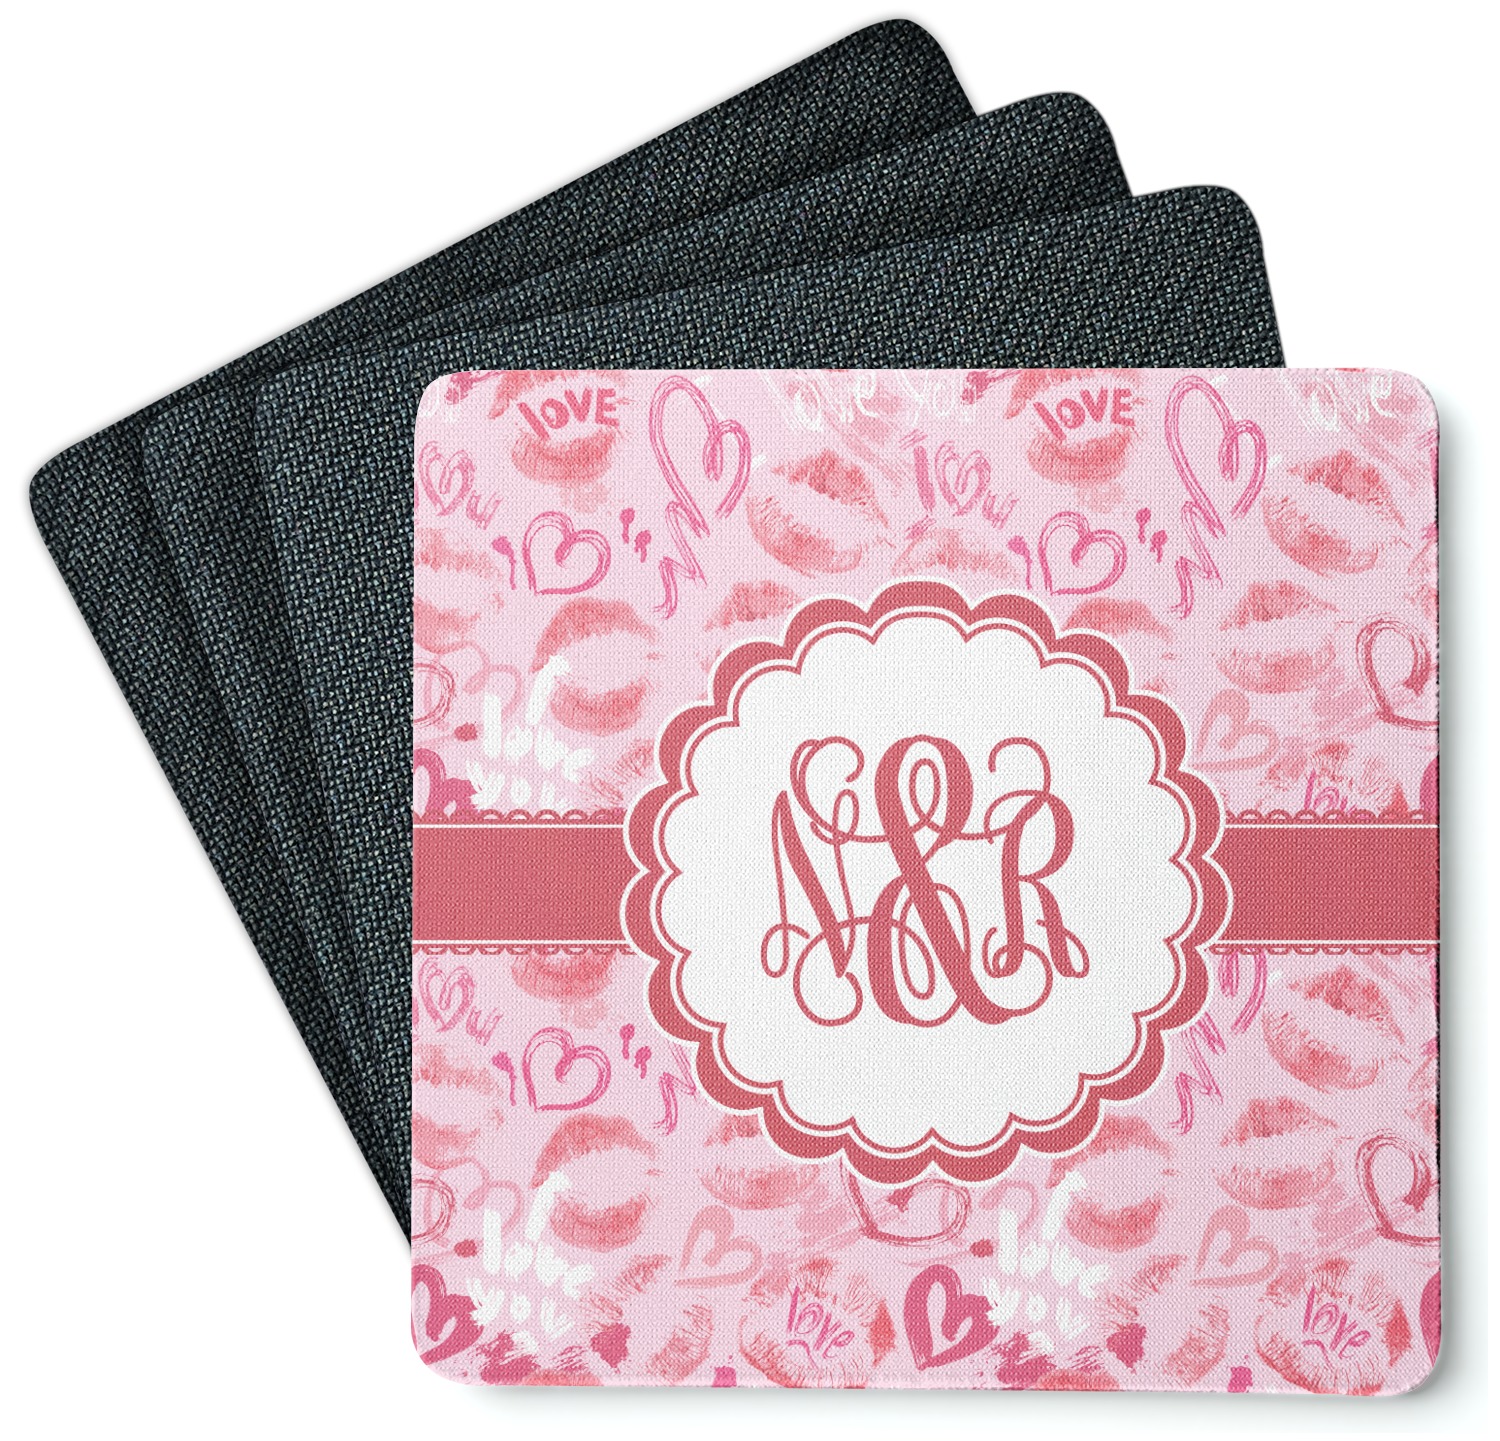 Lips n Hearts Rubber Backed Coaster (Personalized) - YouCustomizeIt